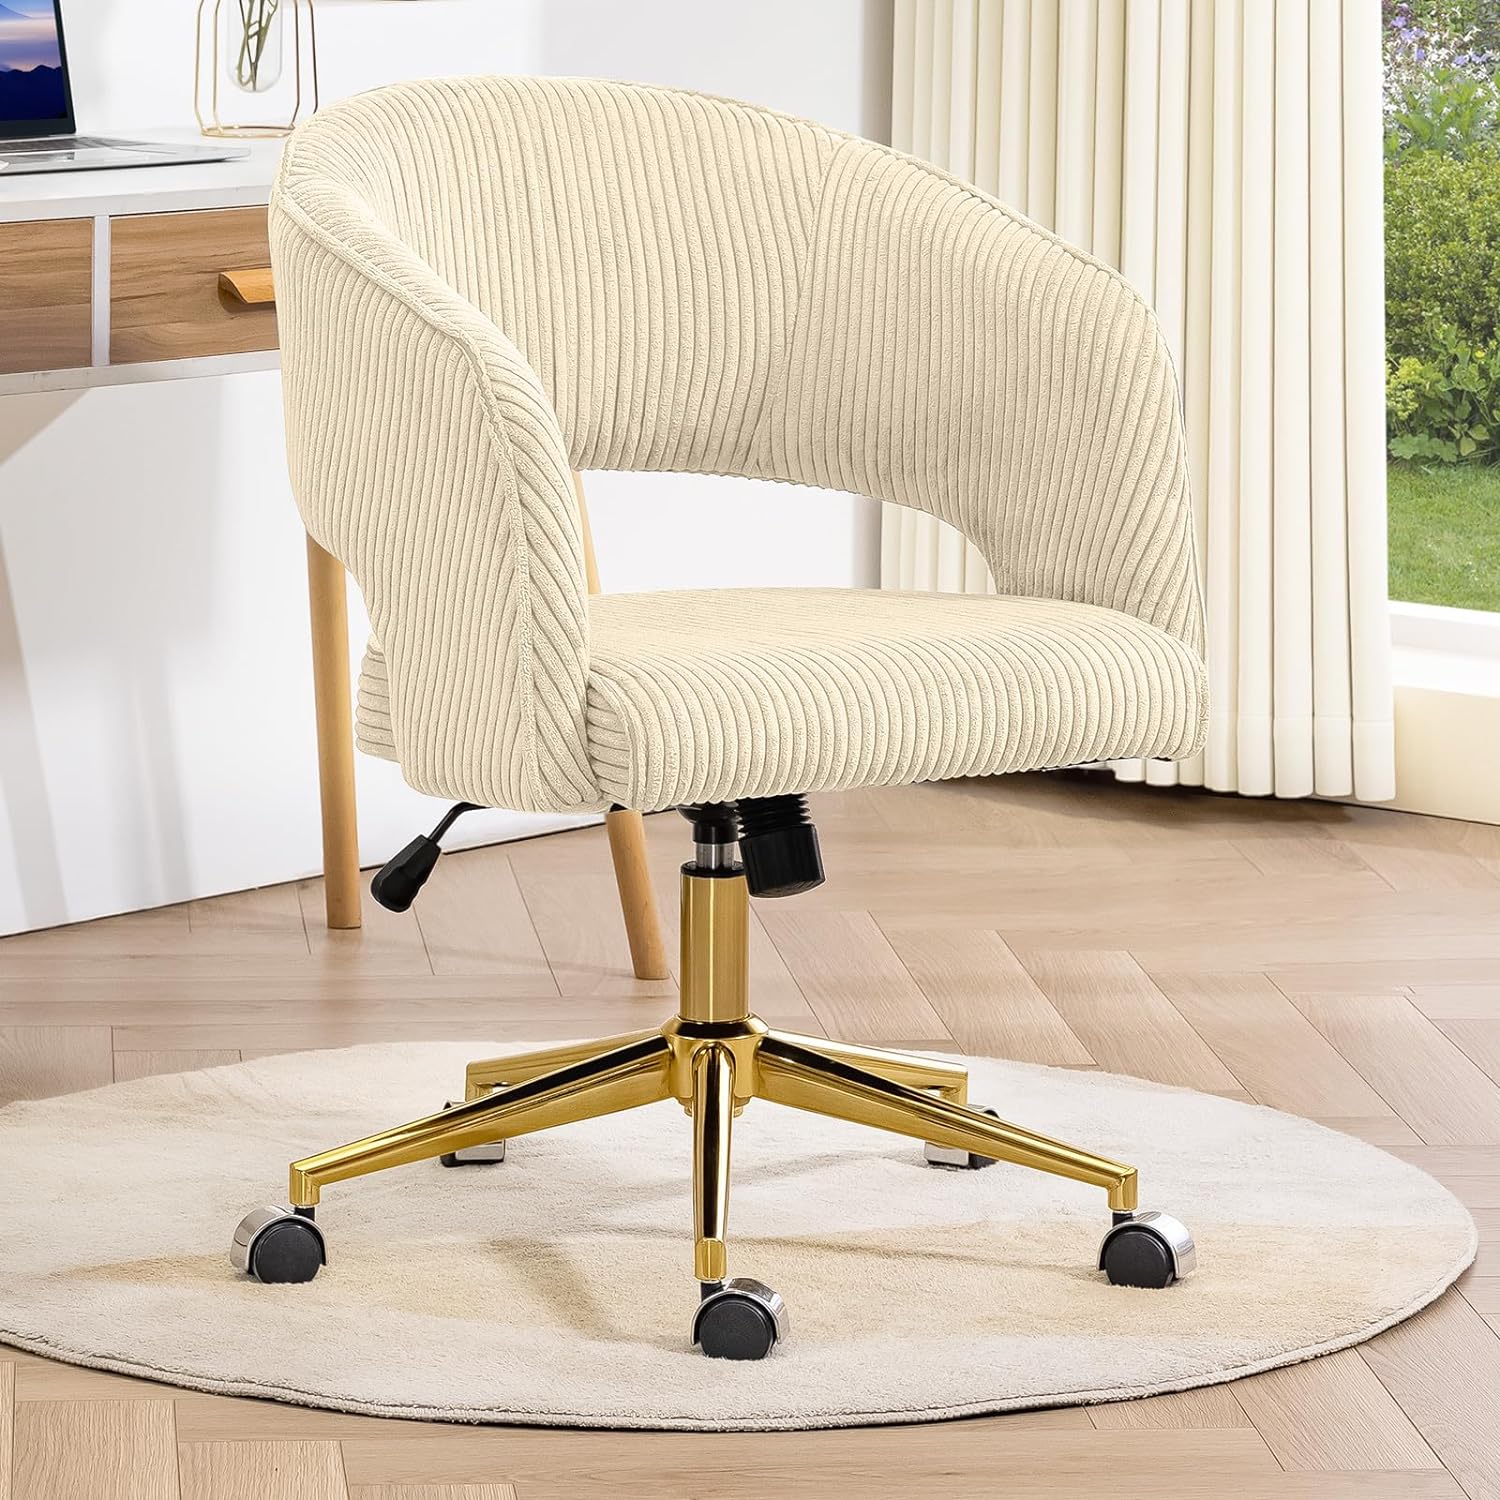 Bumblr Modern Home Office Chair, Corduroy Office Desk Chair with 360 Swivel Gold Base, Comfy Height Adjustable Computer Task Chair Cute Vanity Desk Chair with Wheels for Women, Girls, Beige